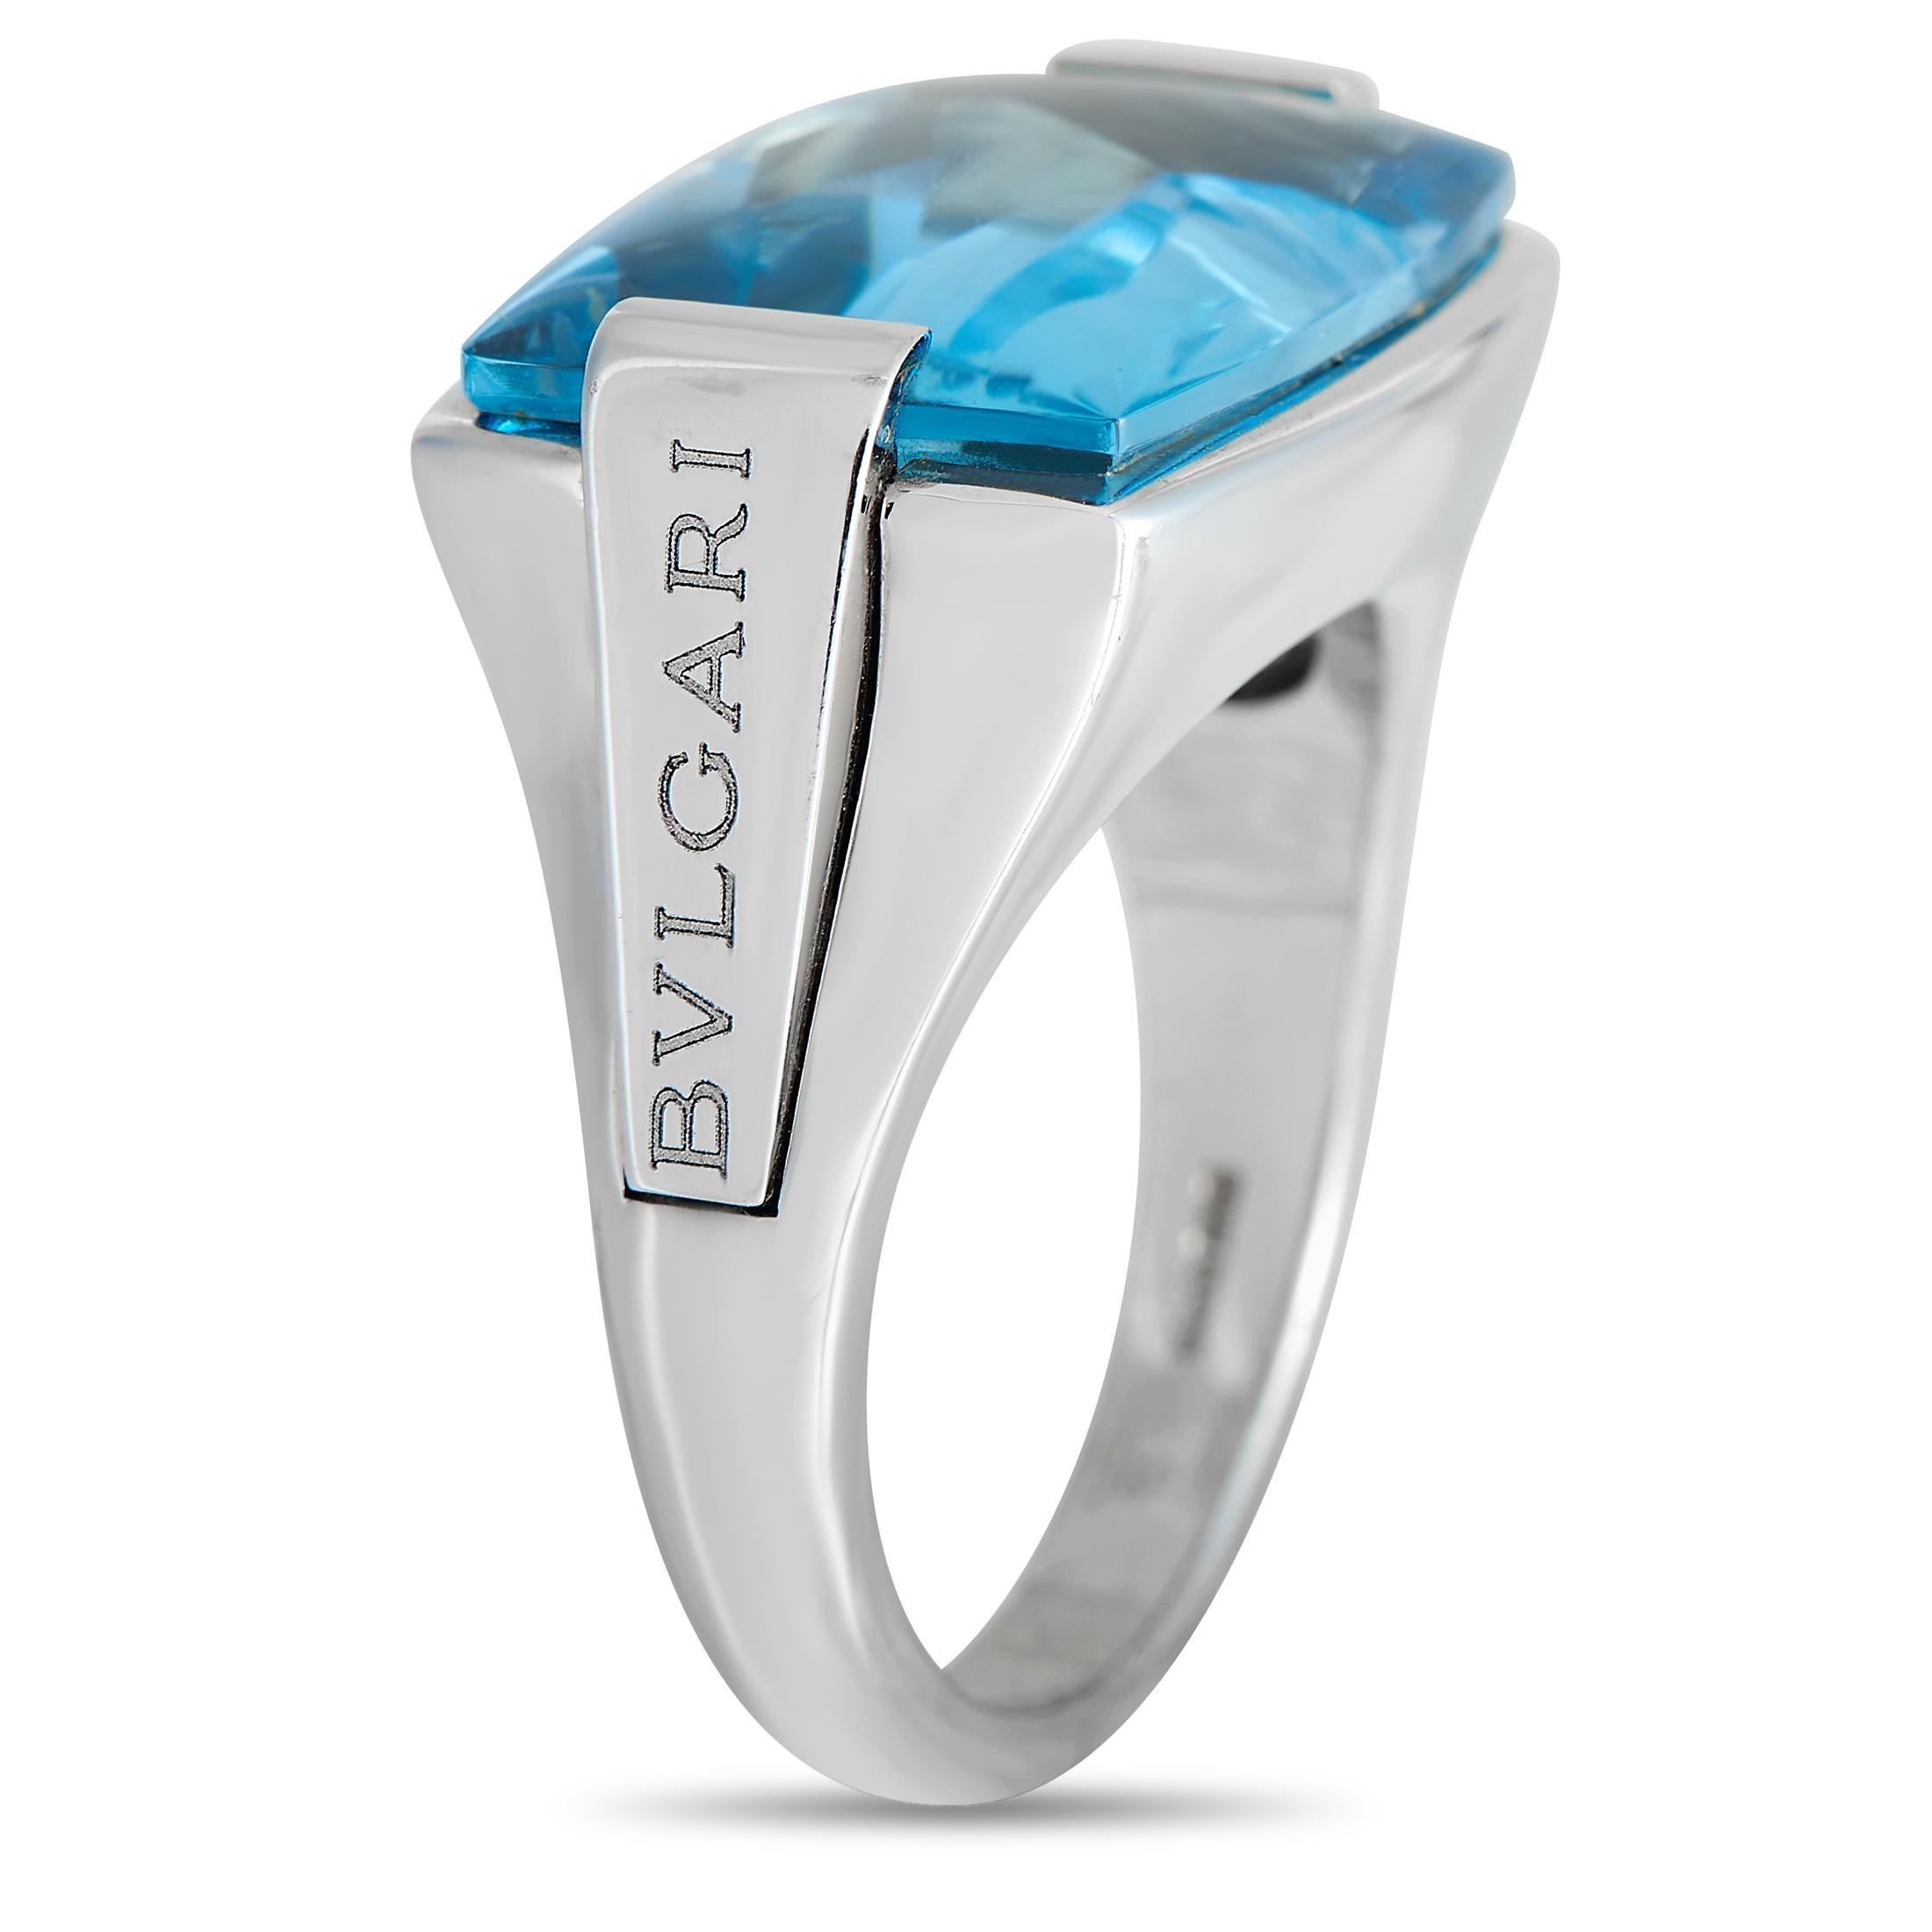 Big, bold, and beautiful, this Bvlgari cocktail ring is a statement piece you can wear with many different looks. It features an 18K white gold band with a large buff top topaz cabochon set in between white gold shoulders engraved with the iconic